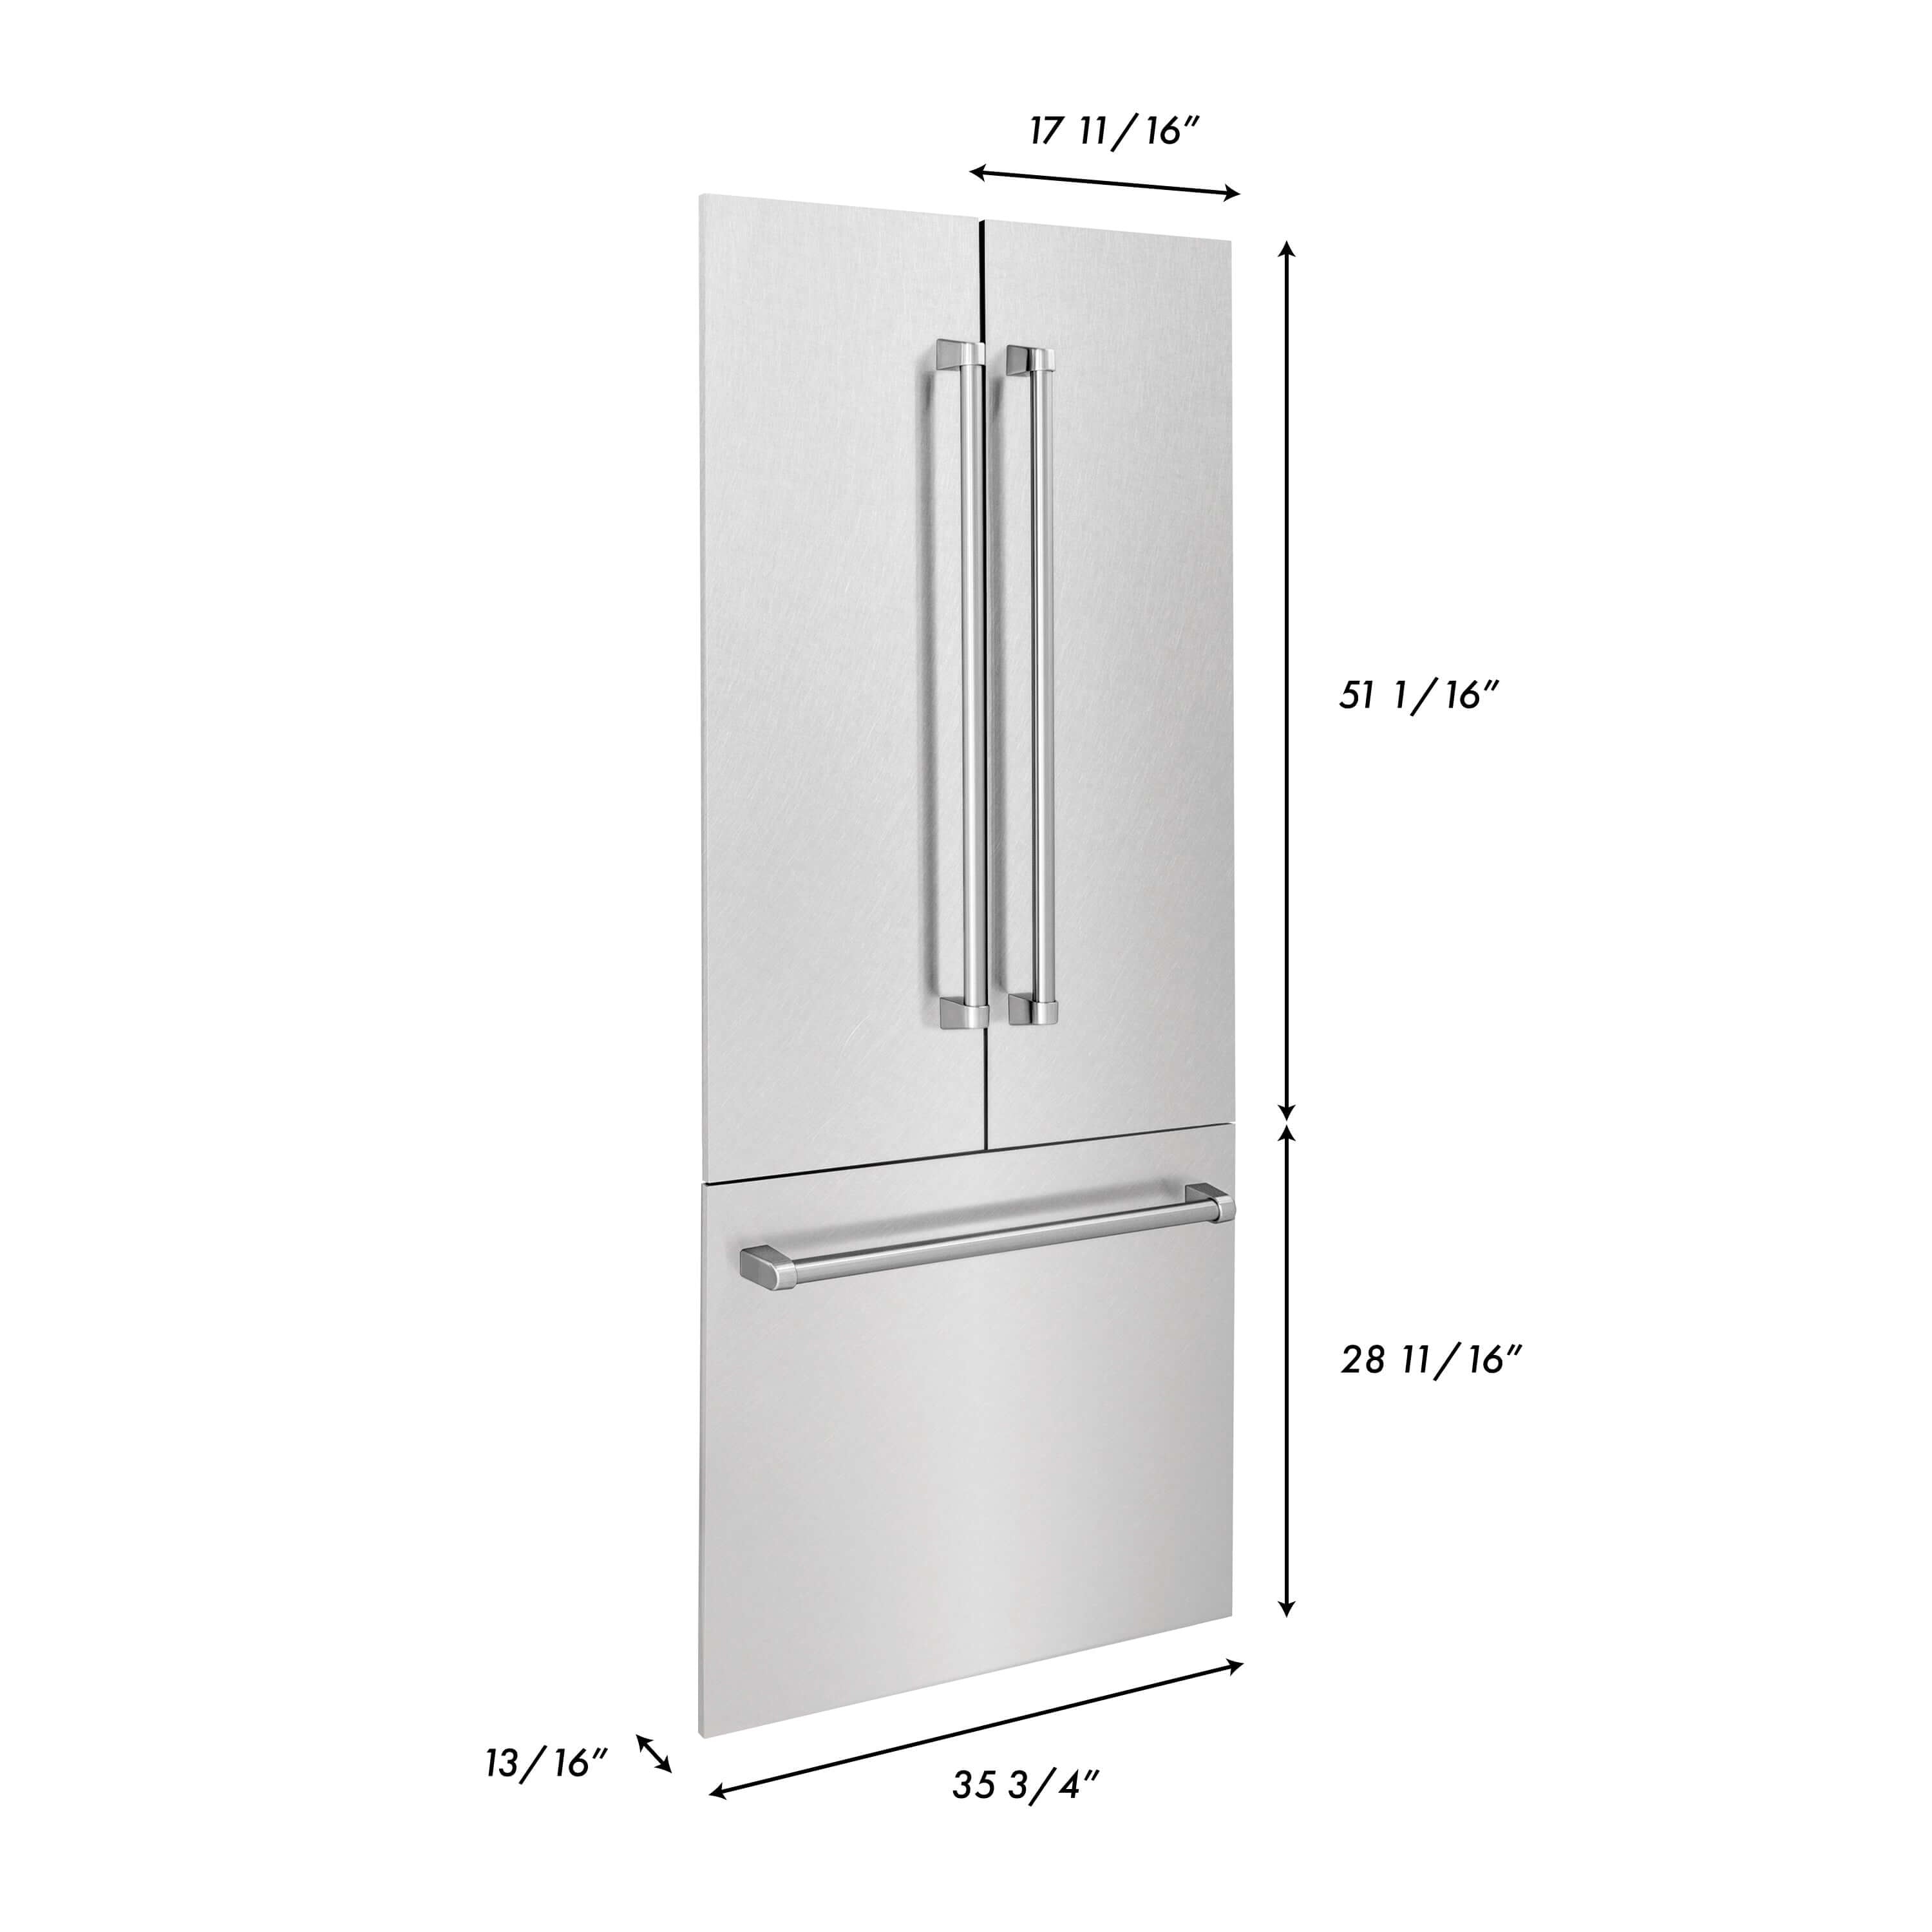 Panels & Handles Only- ZLINE 36 in. Refrigerator Panels in Fingerprint Resistant Stainless Steel for a 36 in. Built-in Refrigerator (RPBIV-SN-36) dimensional diagram with measurements.